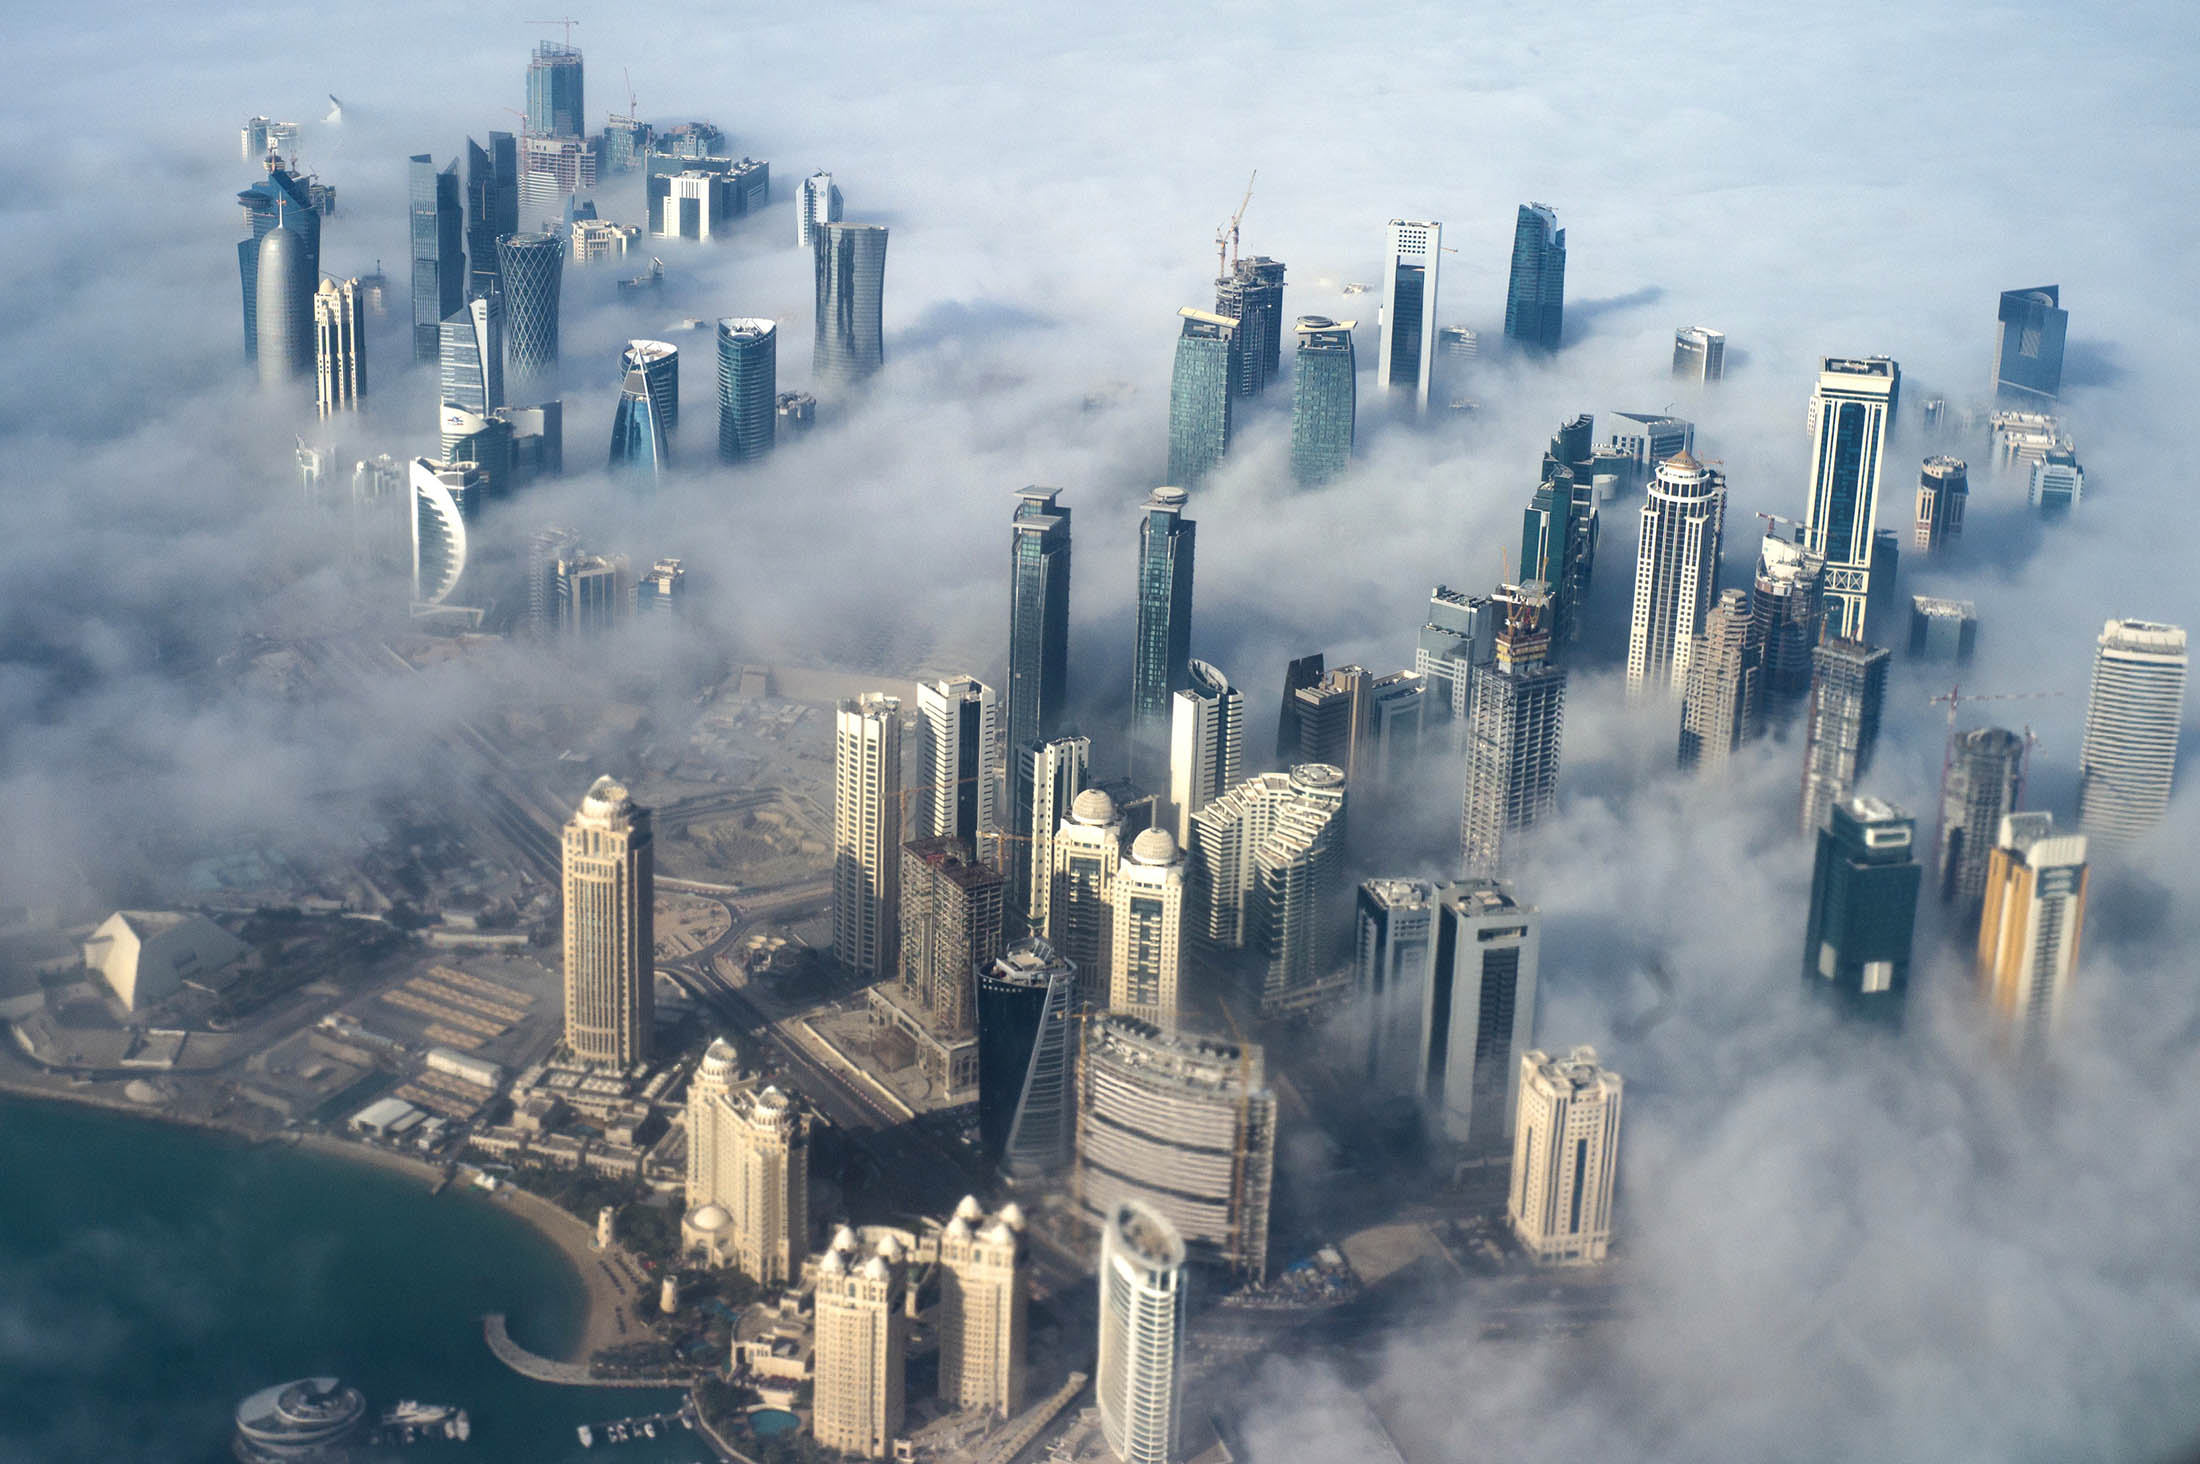 epa06011227 (FILE) - An aerial view of high-rise buildings emerging through fog covering the skyline of Doha, as the sun rises over the city, in Doha, Qatar, 15 February 2014 (reissued 05 June 2017). According to media reports, Egypt, Saudi Arabia, Bahrain and the United Arab Emirates cut off diplomatic ties with Qatar on 05 June 2017, accusing Qatar of supporting terrorism. EPA/YOAN VALAT
